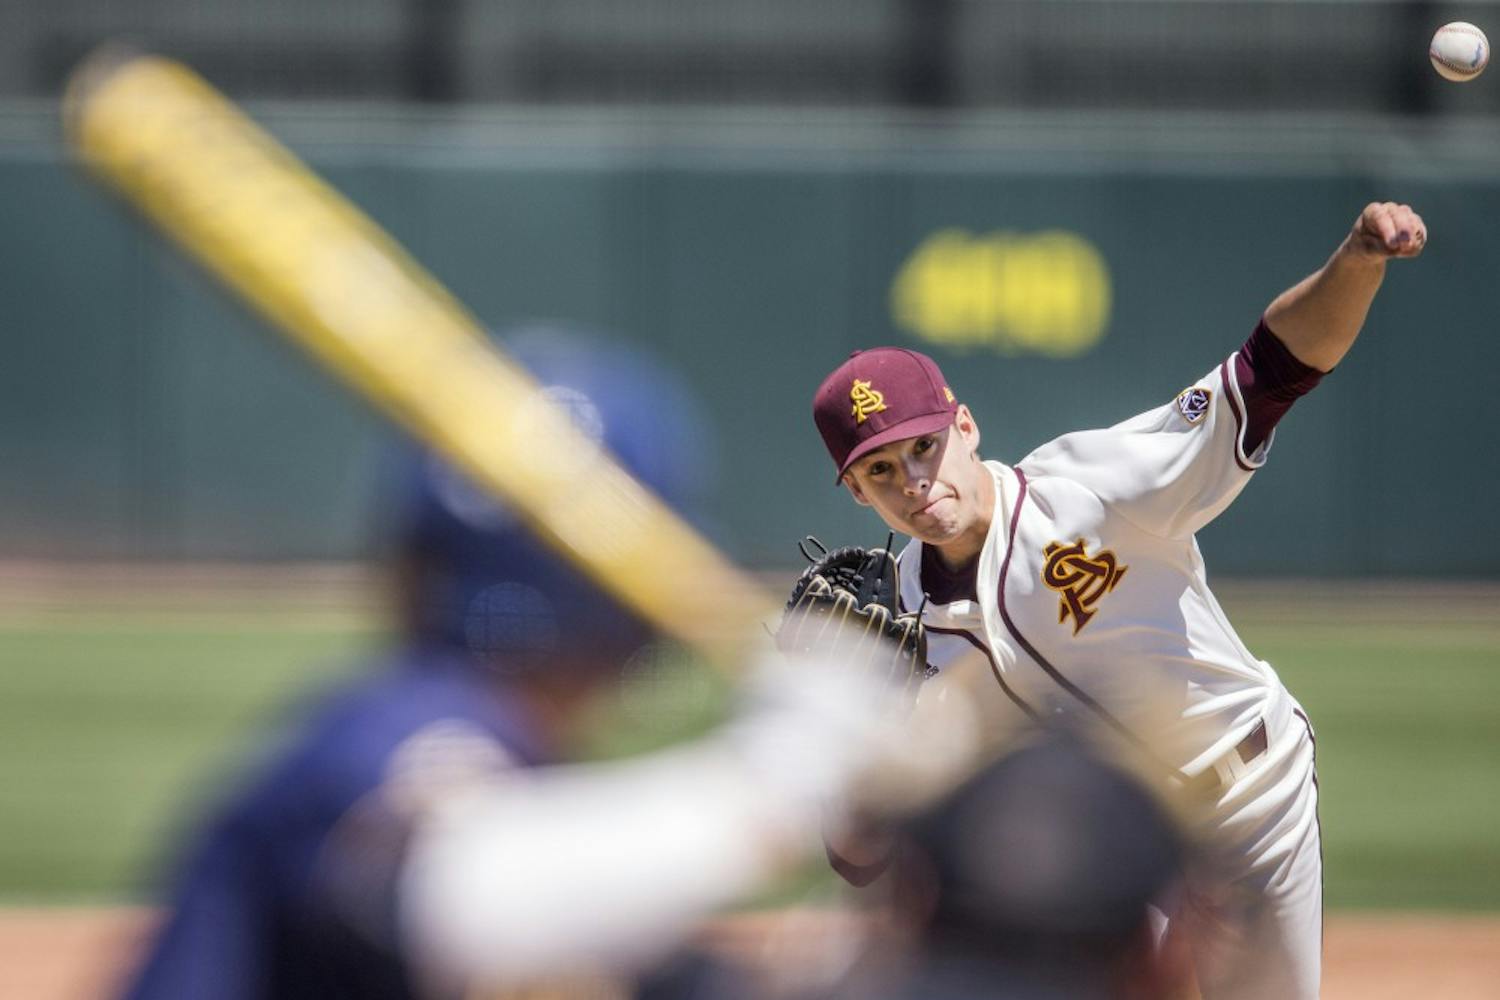 ASU baseball's Zach Dixon pitches during a game against California at Phoenix Municipal Stadium in Phoenix, Arizona, on Sunday, April 17, 2016. The Sun Devils won the final game in this series 4-0.